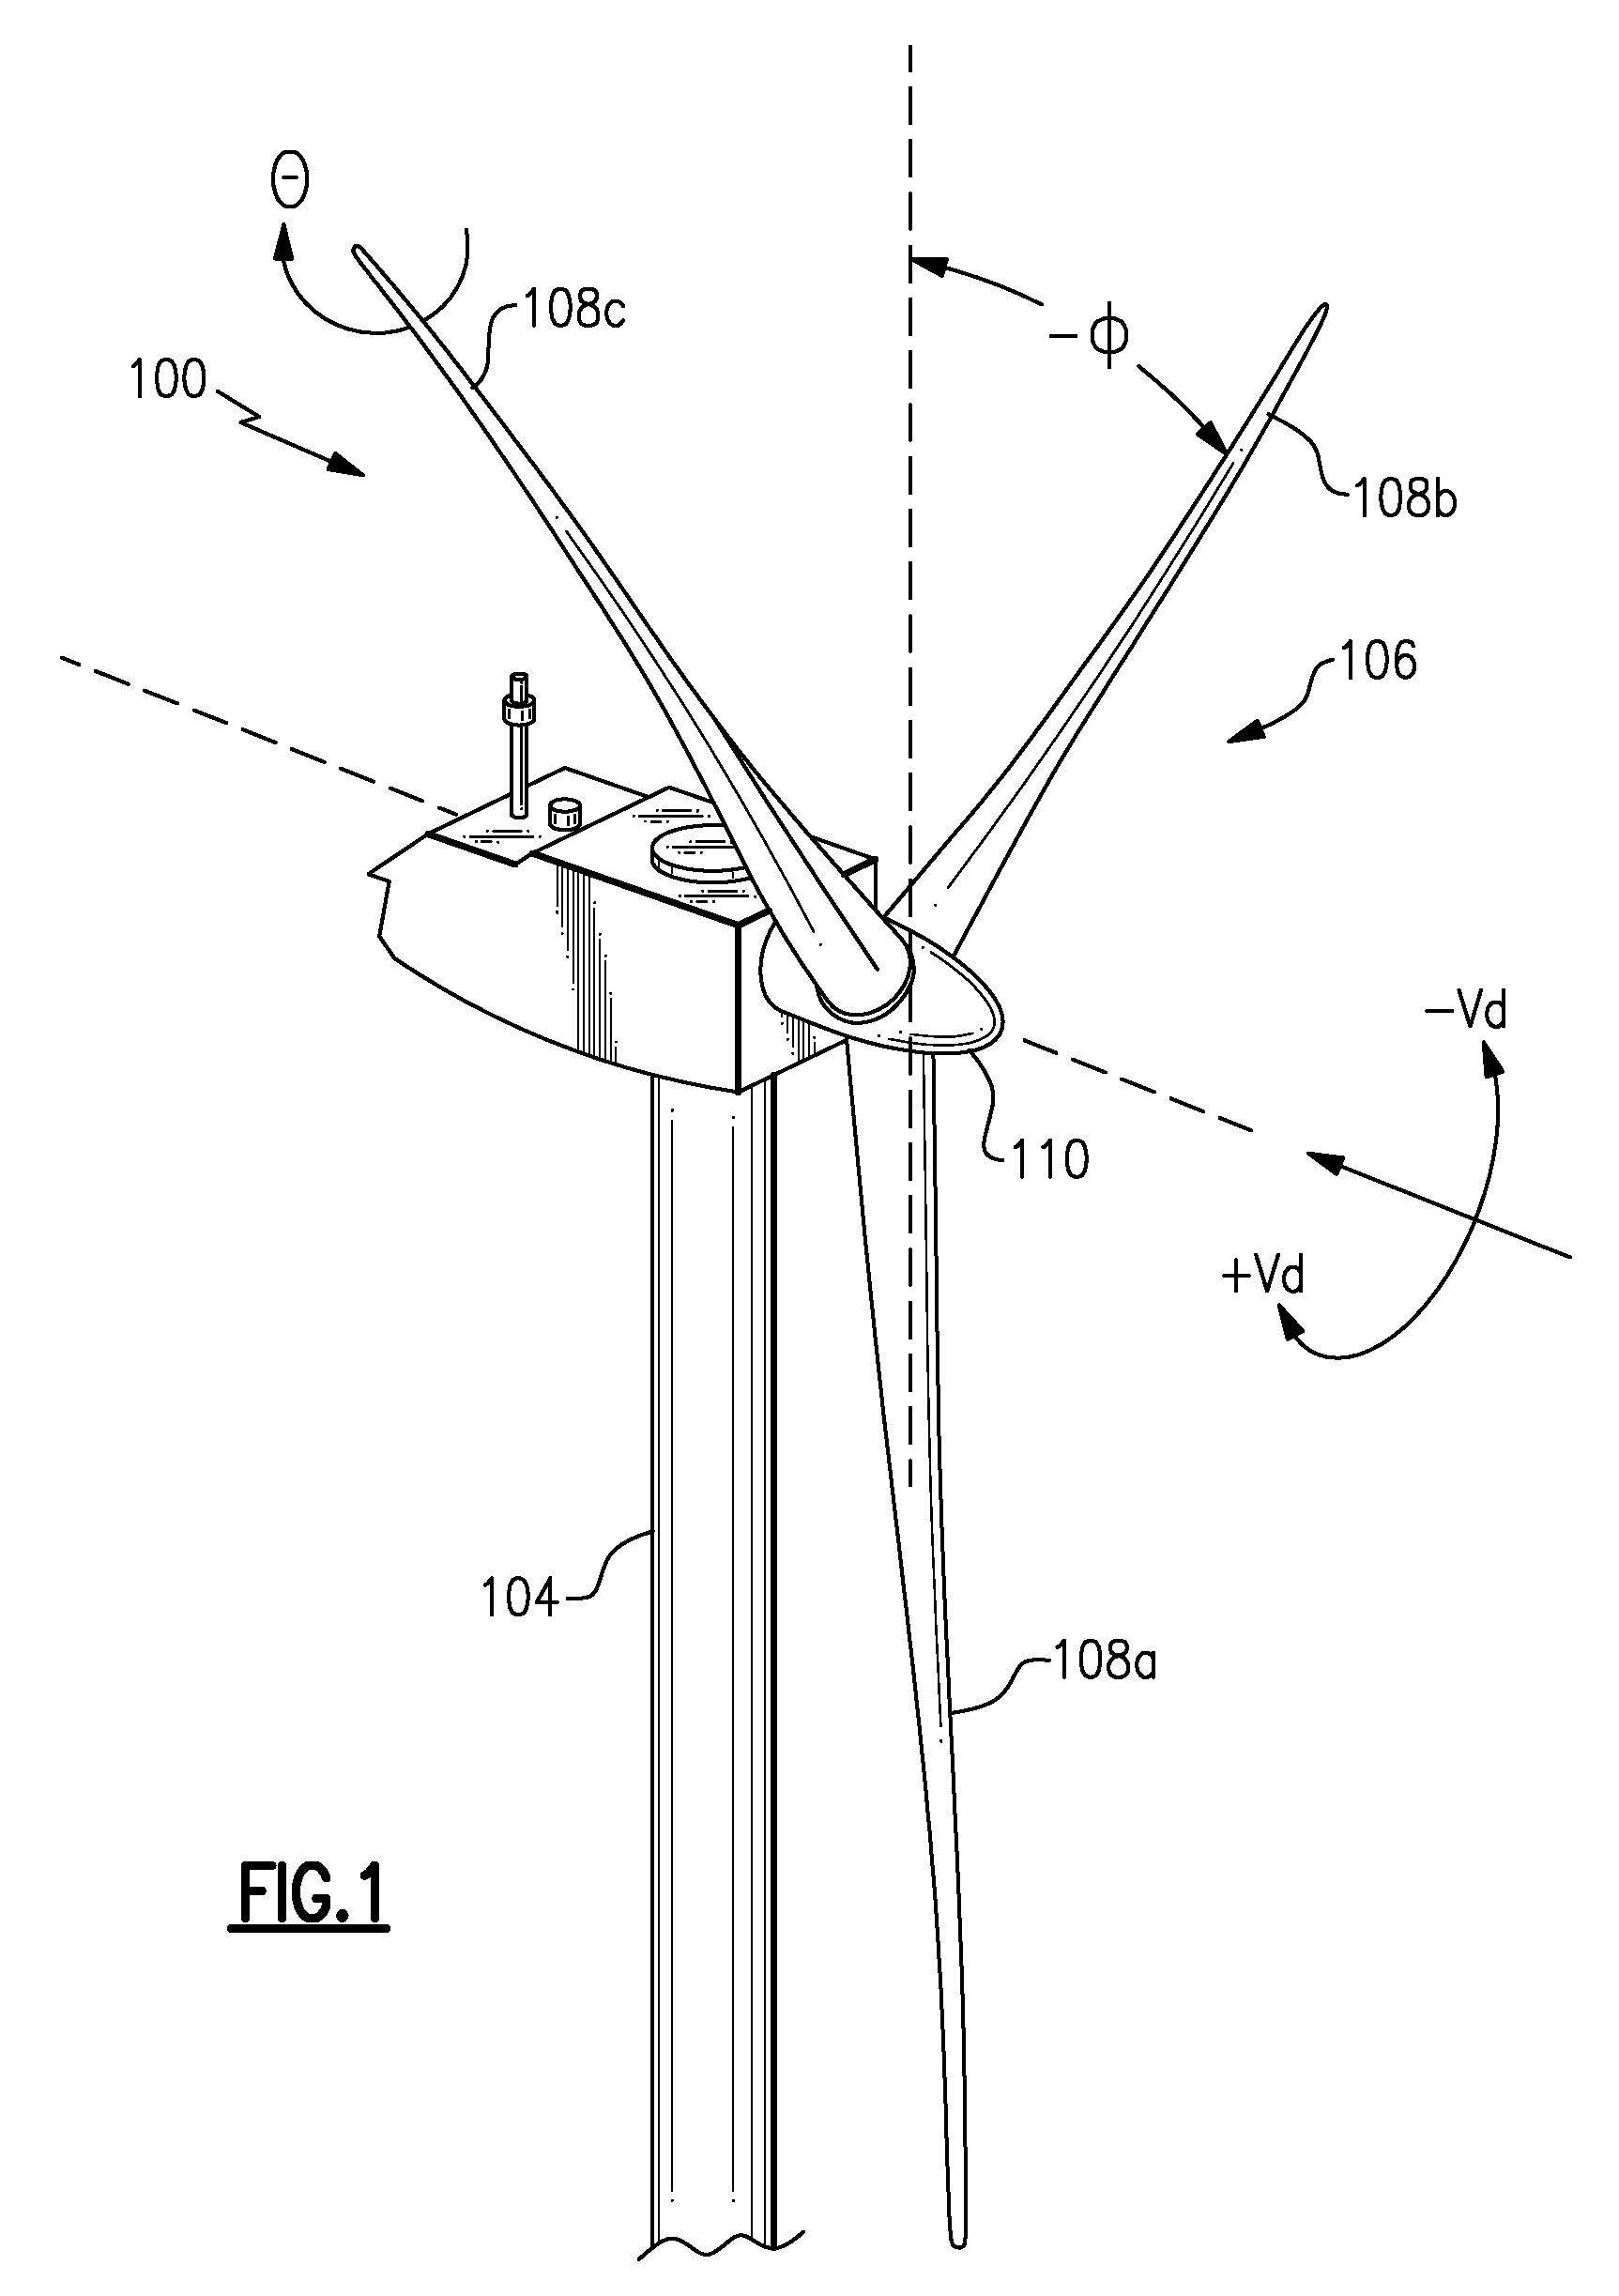 System and method for controlling a wind turbine during loss of grid power and changing wind conditions